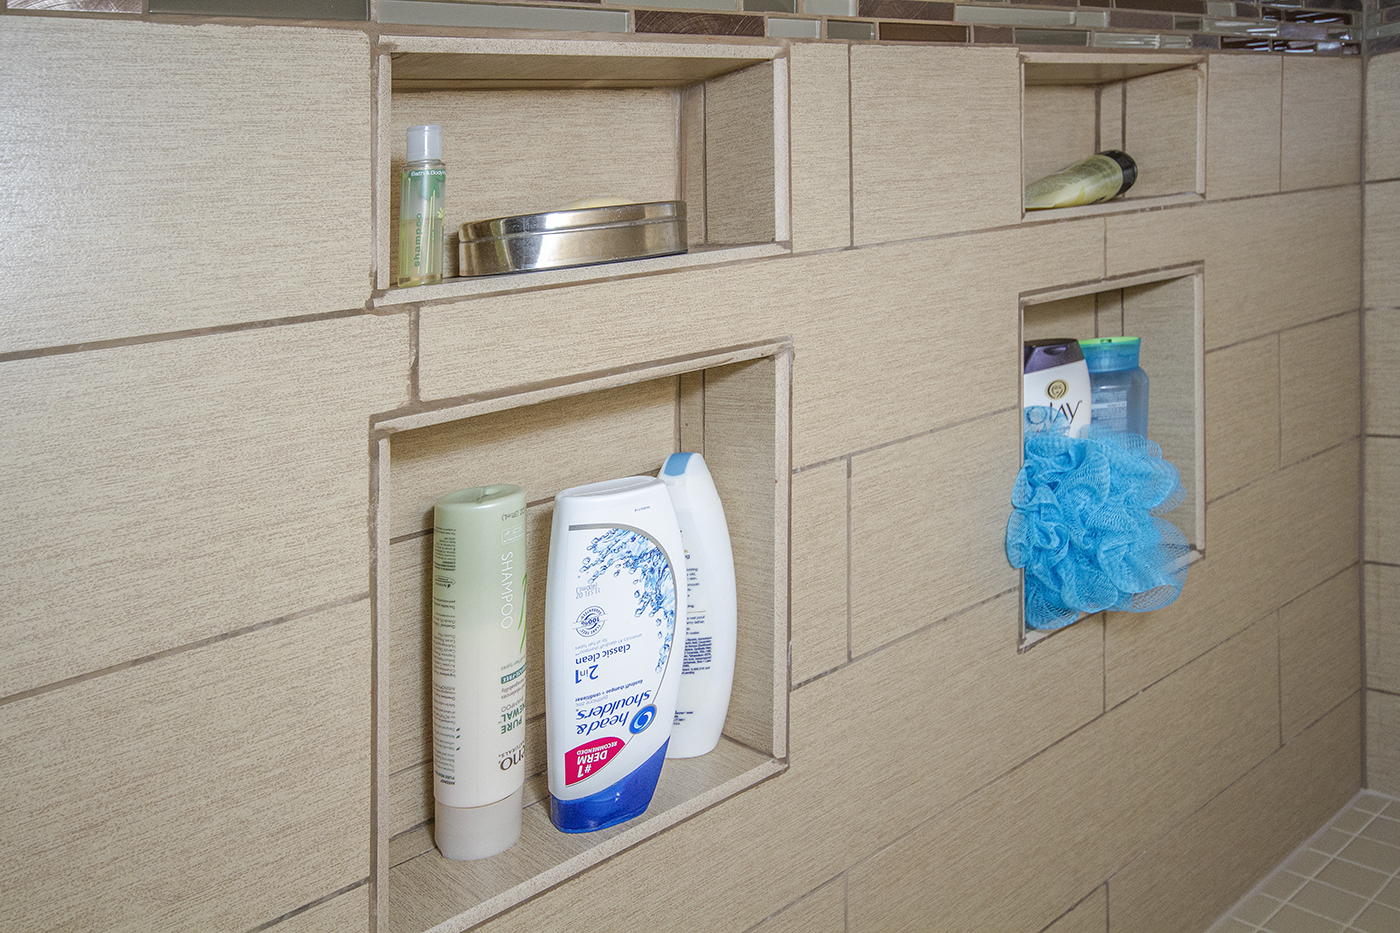 Shelves built into a shower wall to hold soap and shampoo.